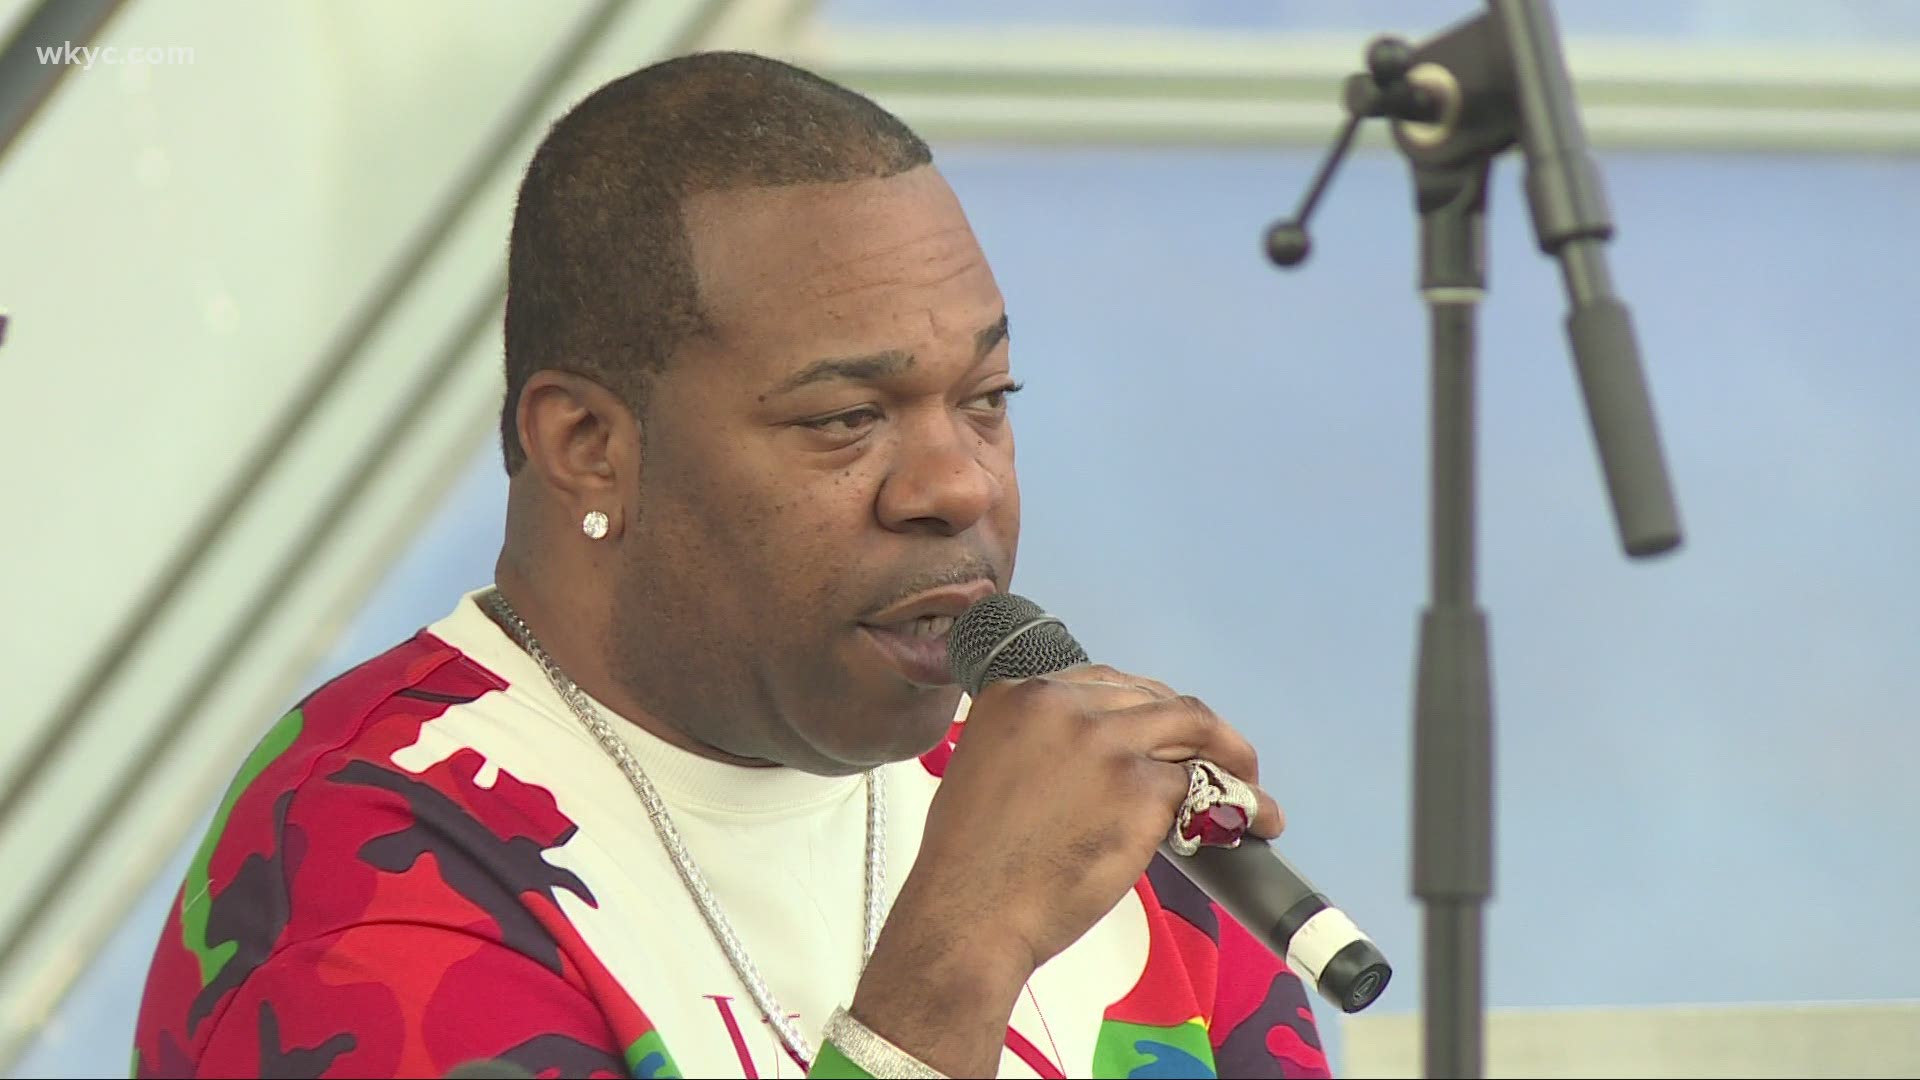 Hip-Hop legend Busta Rhymes the Rock and Roll Hall of Fame this week.